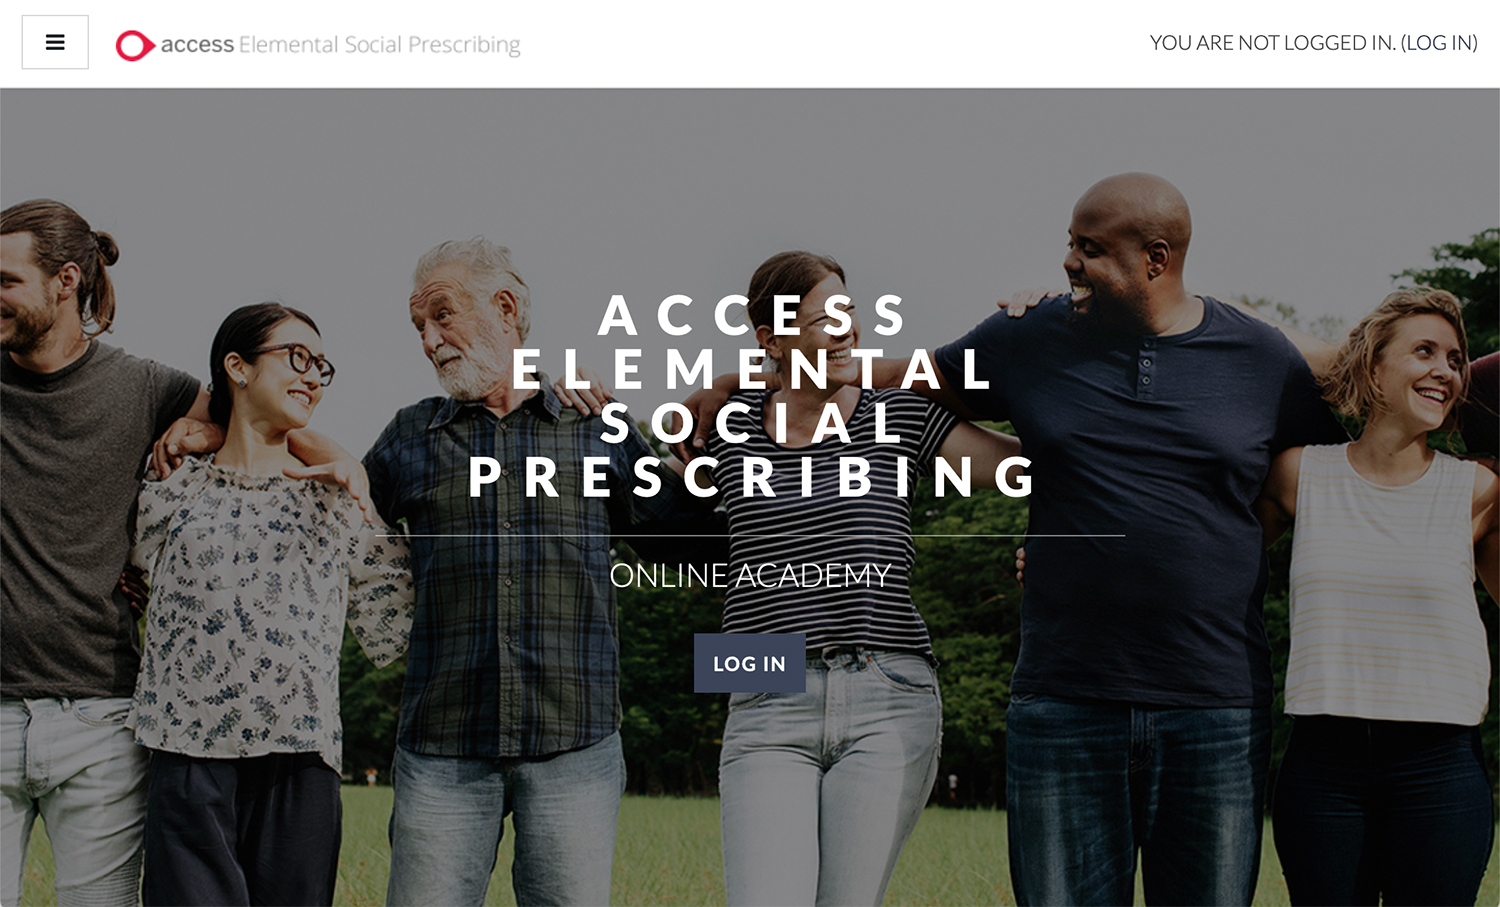 Access Group eLearning Portal